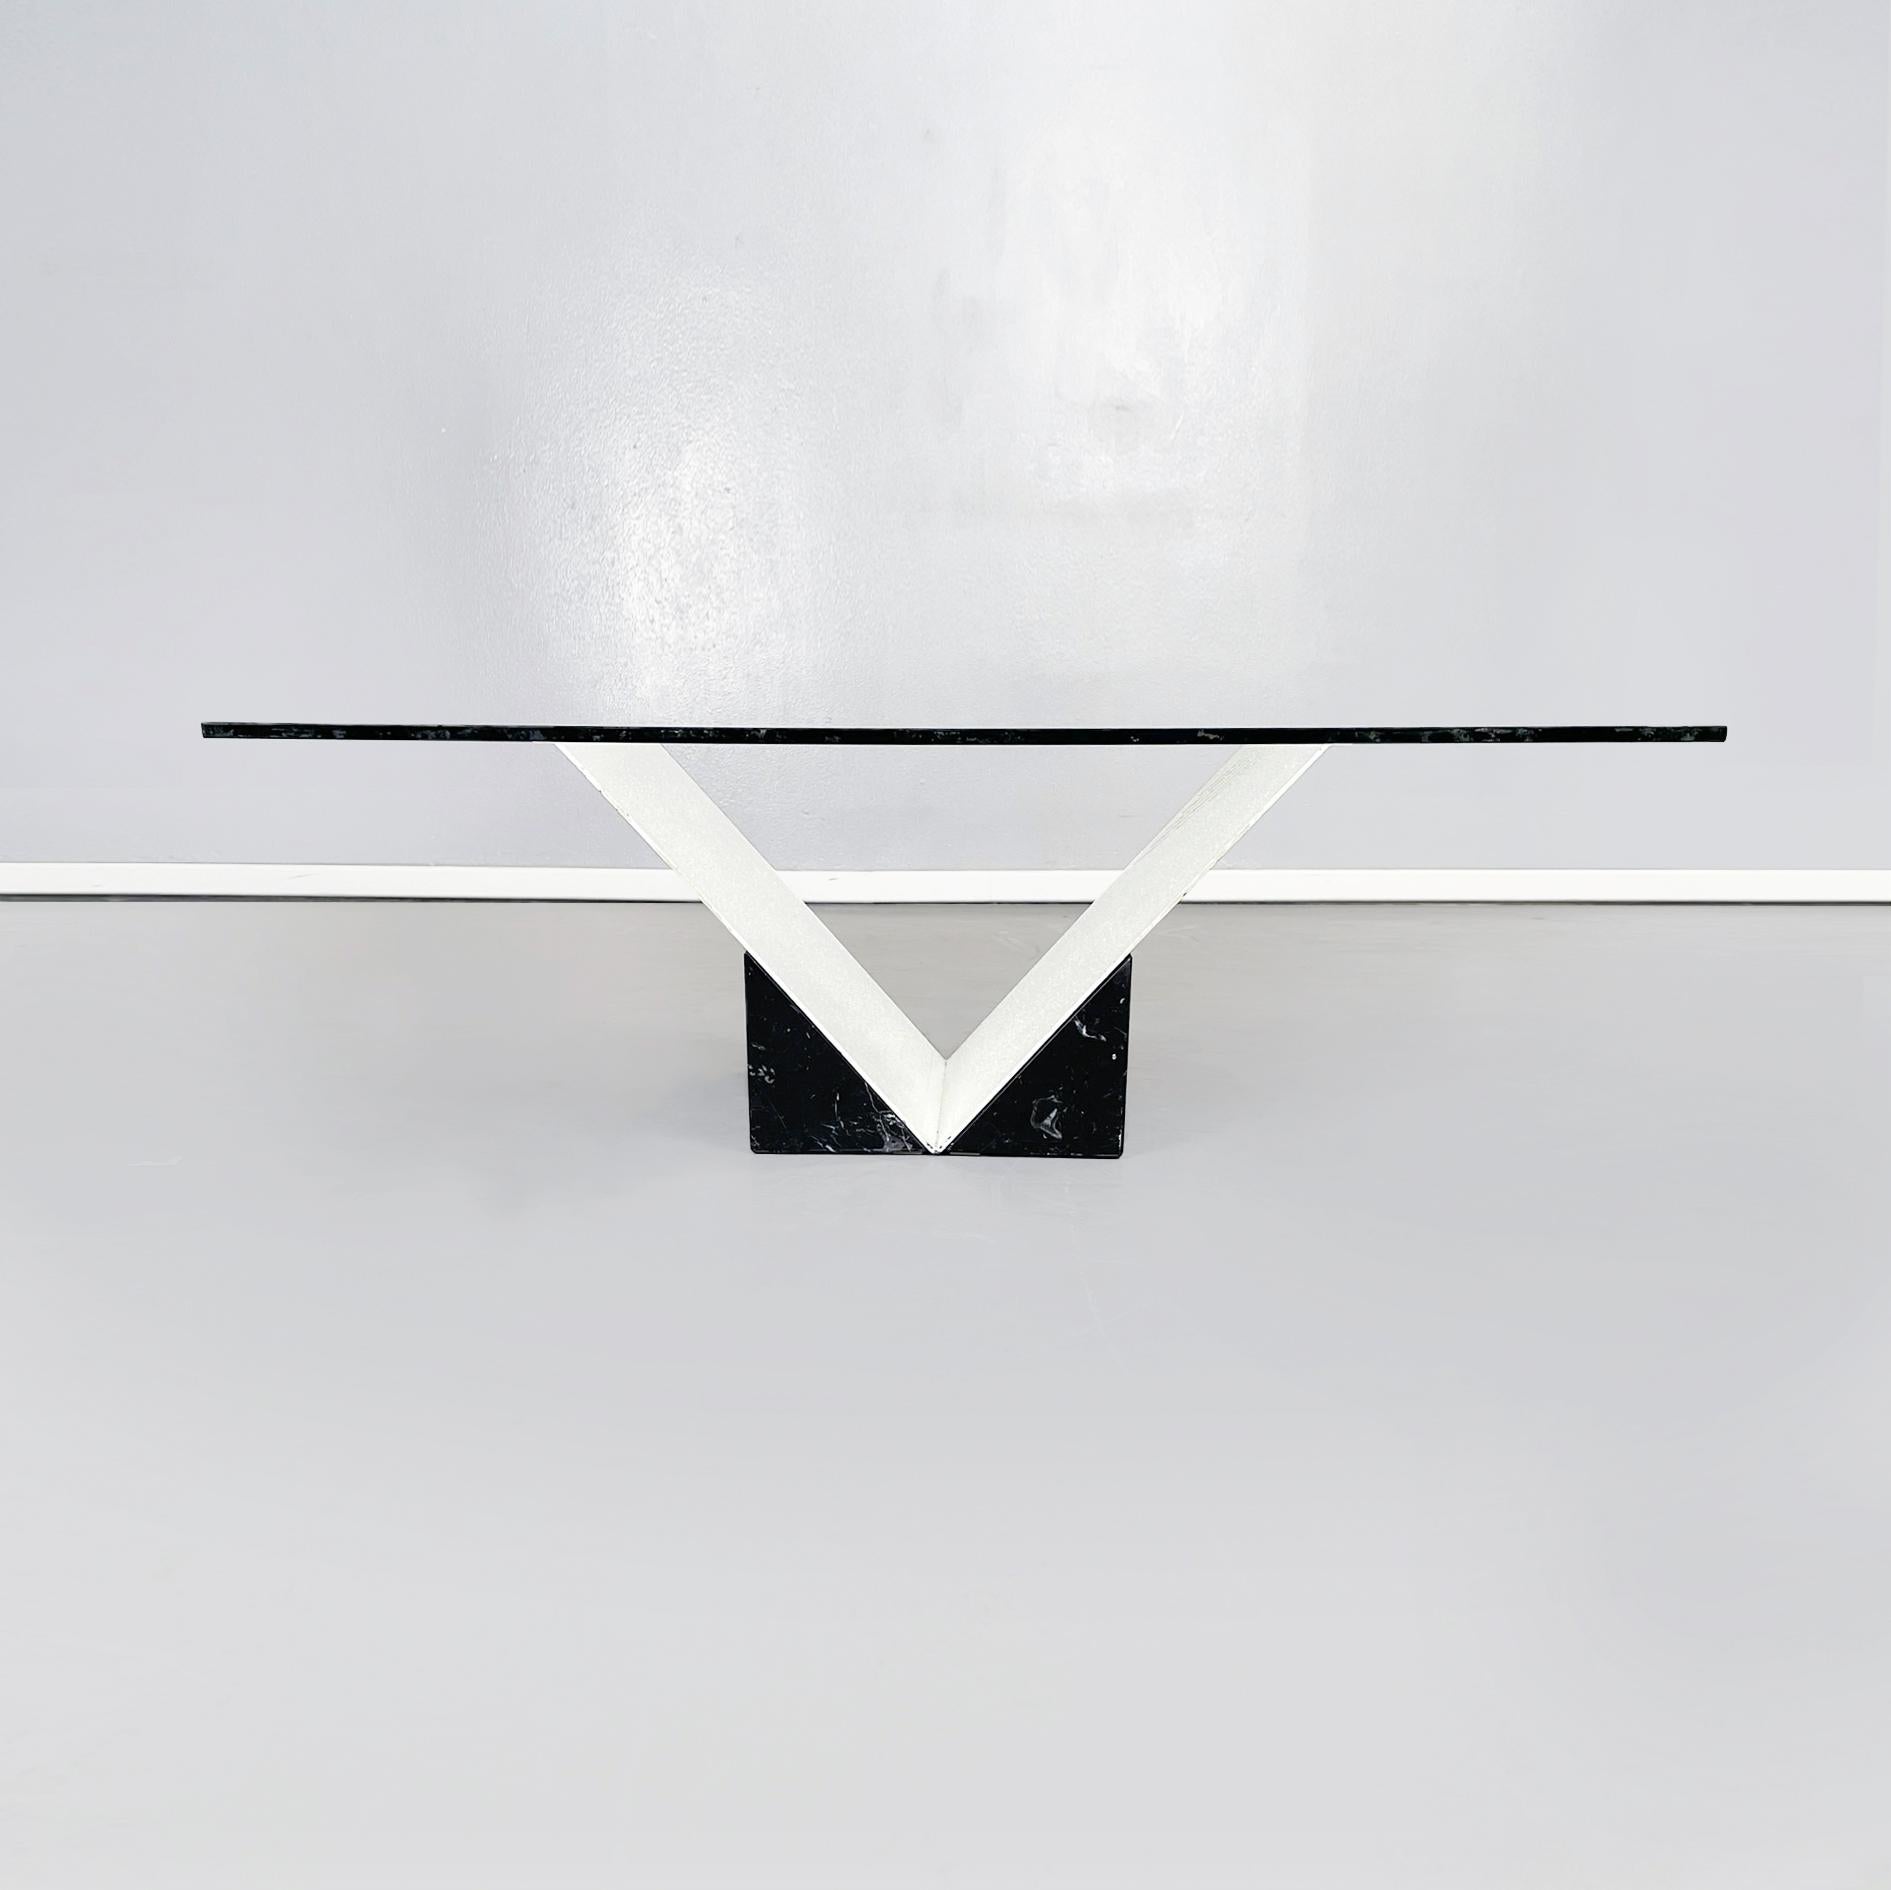 Italian modern Coffee table in glass, white metal, black marquinia marble, 1980s.
Coffee table with square thick glass top. The base is made up of a V-shaped structure in white painted metal, set in a block of black marquinia